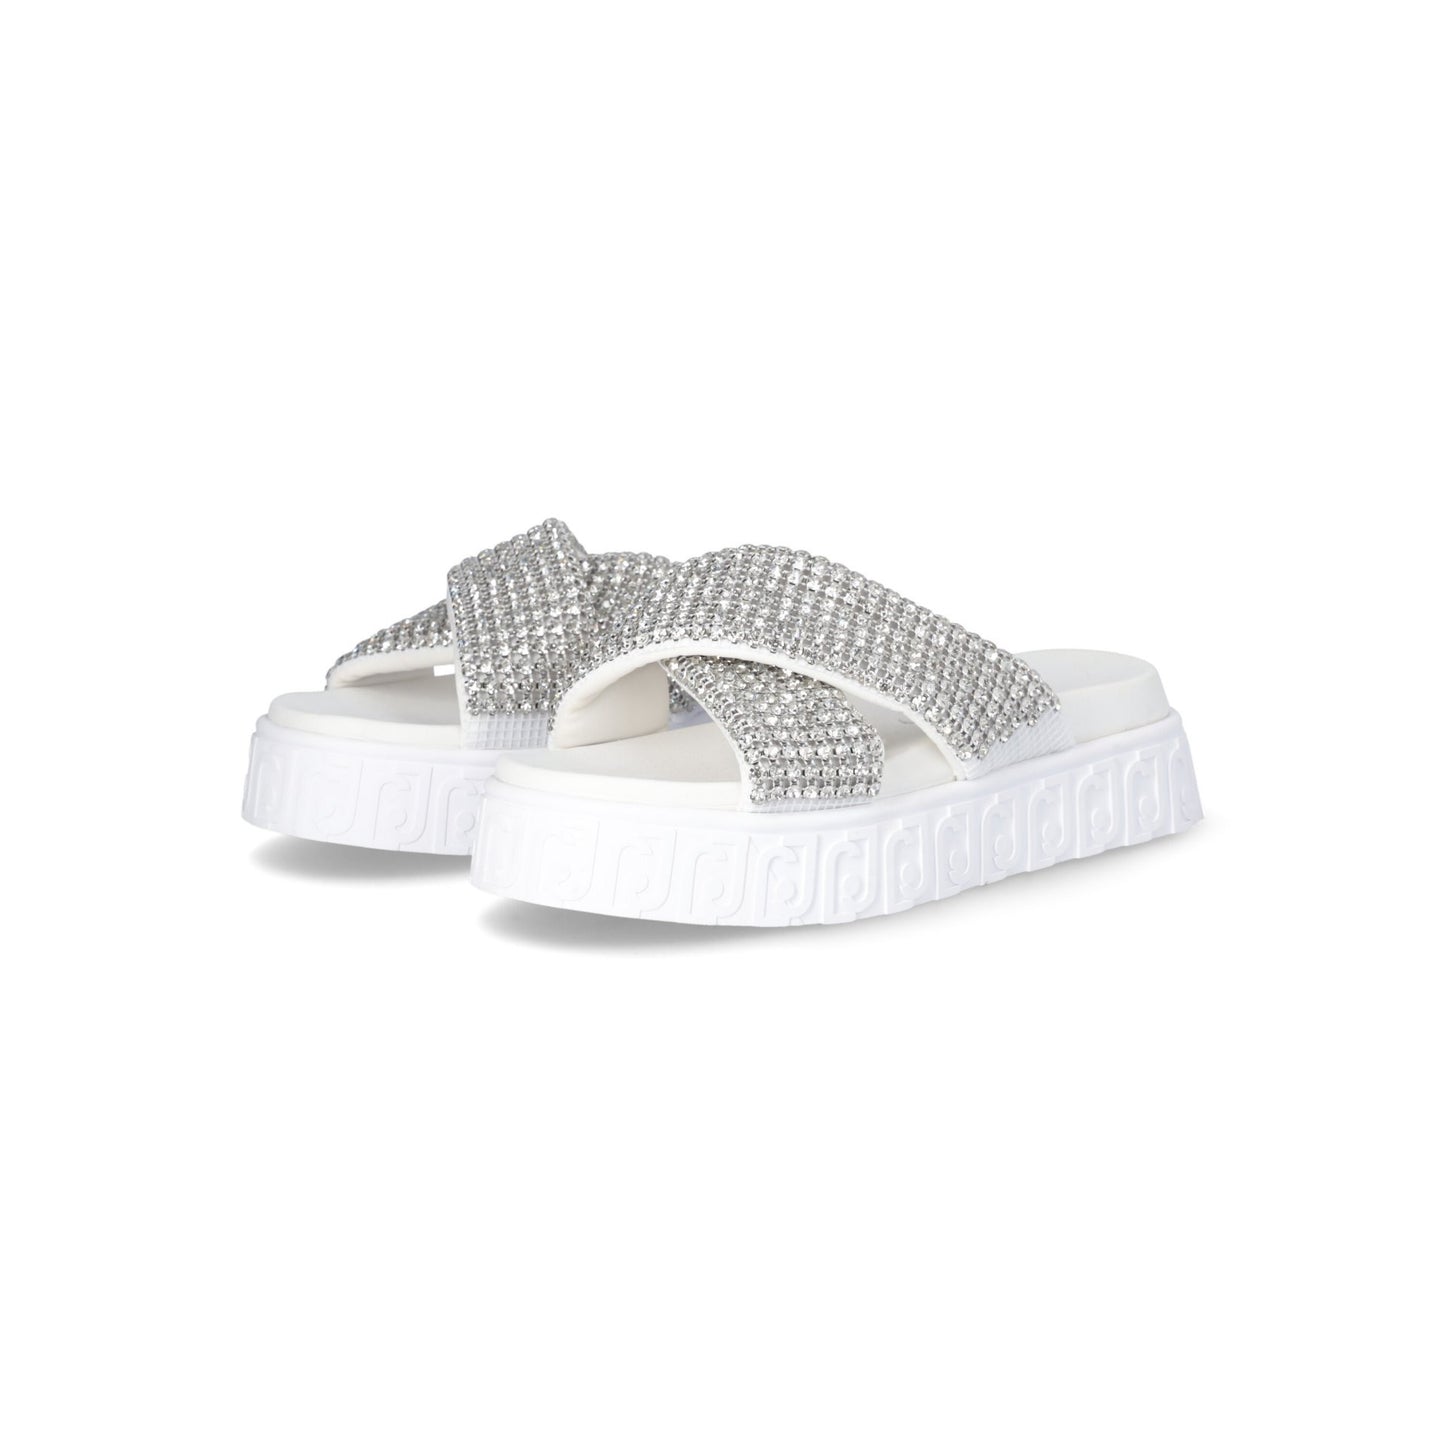 Sandal net with strass white